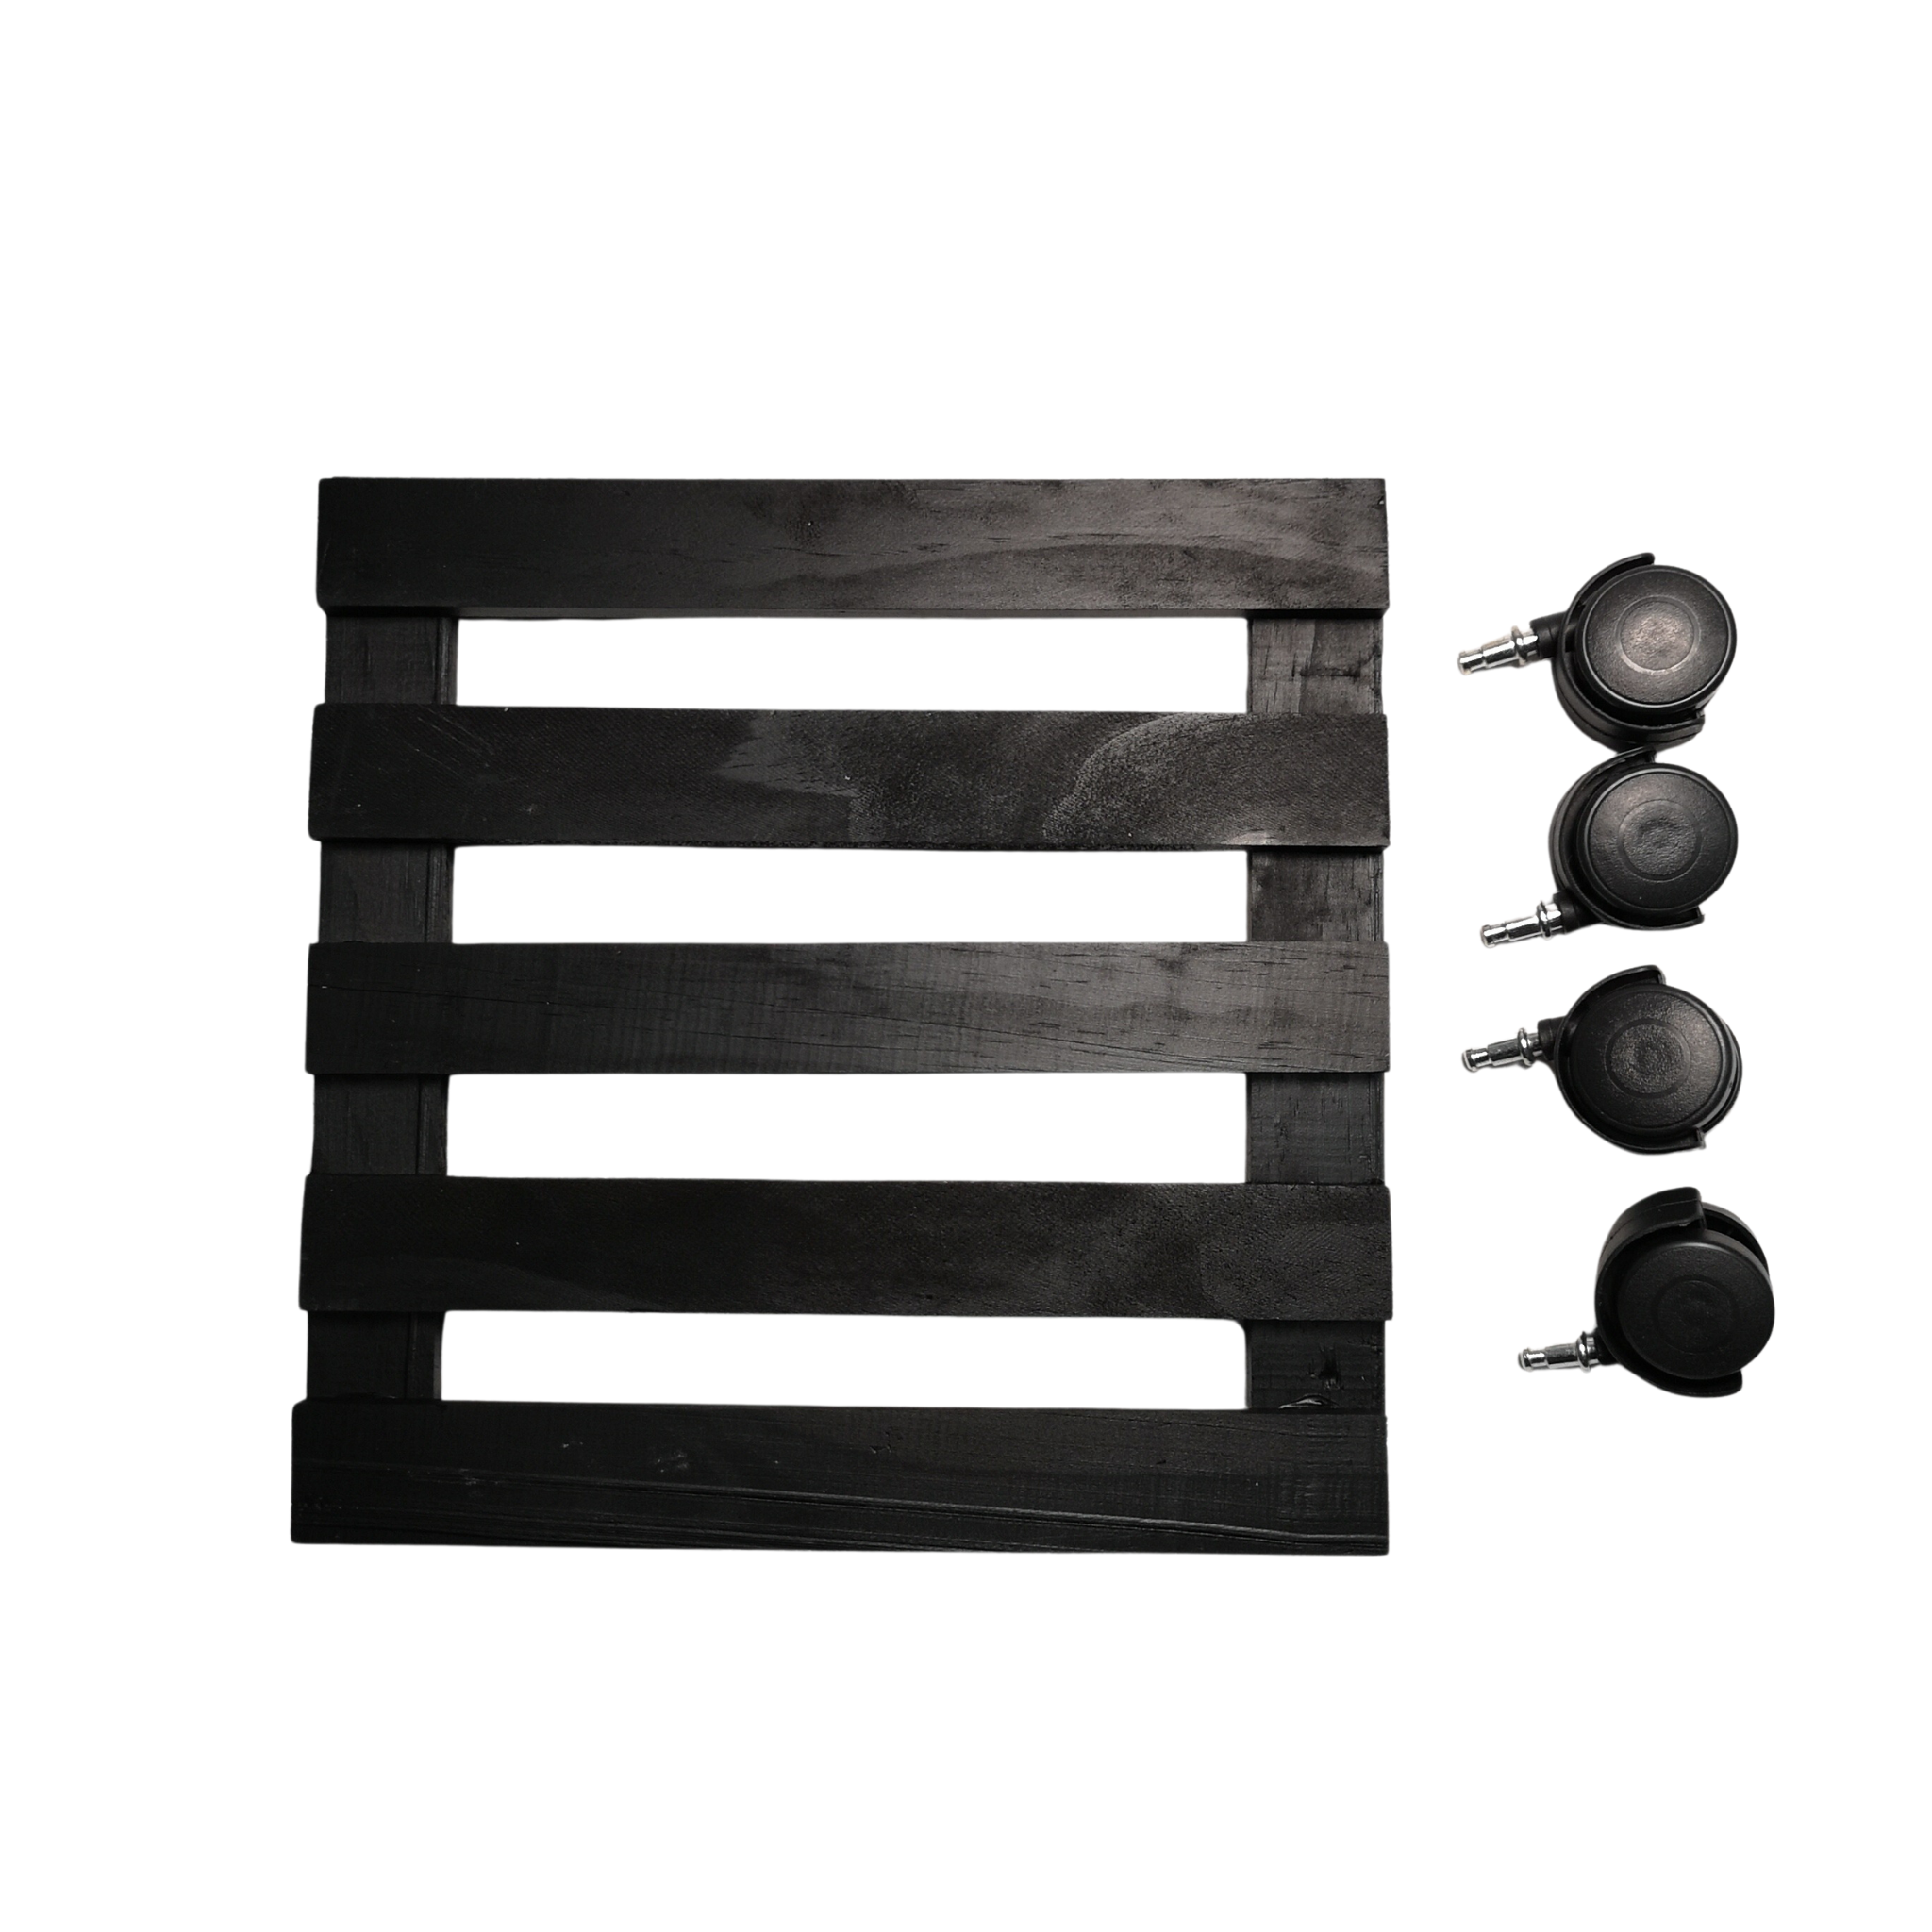 Pack of 2 28cm Black Square Wooden Garden Plant Pot Flower Trolley Stand On Wheels